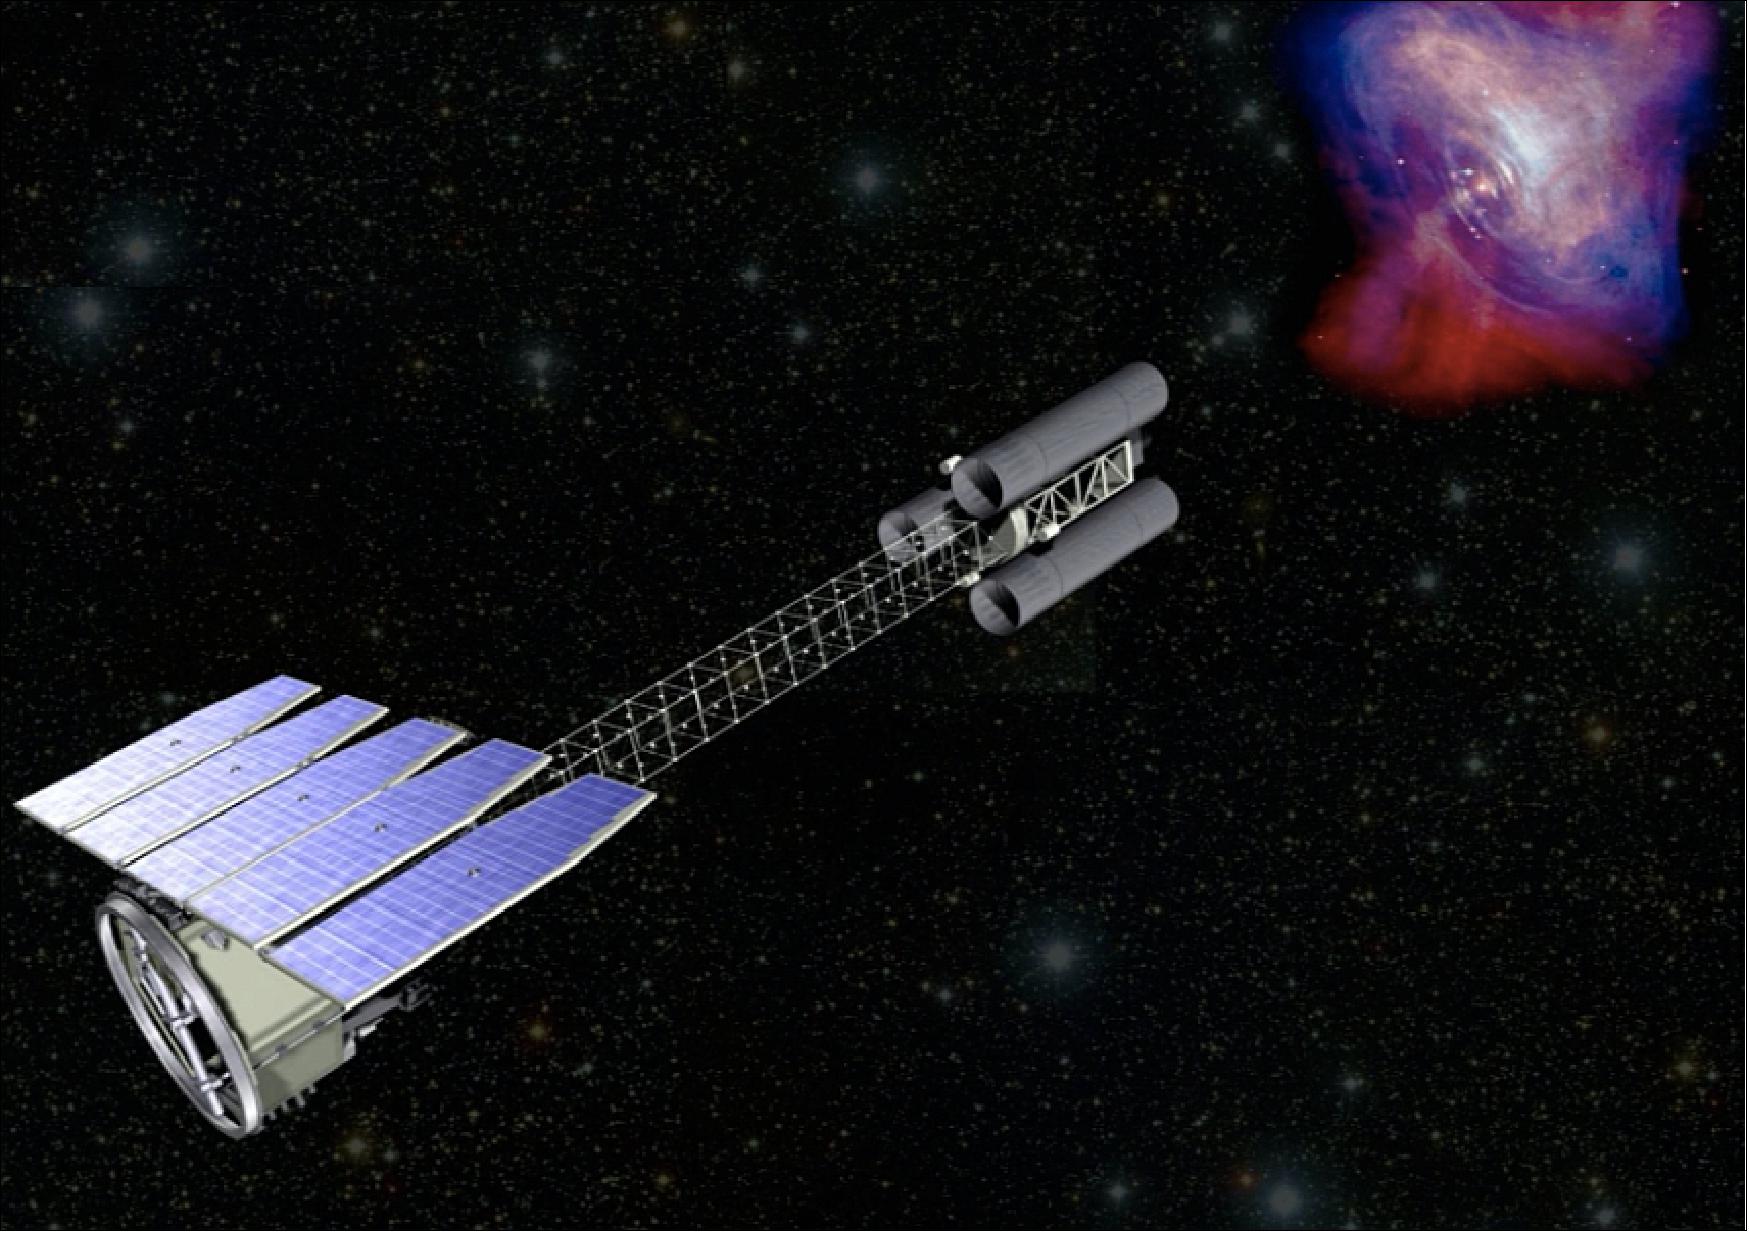 Figure 1: Artist's rendition of the IXPE spacecraft [image credit: HEASARC (High Energy Astrophysics Science Archive Center)] 8)